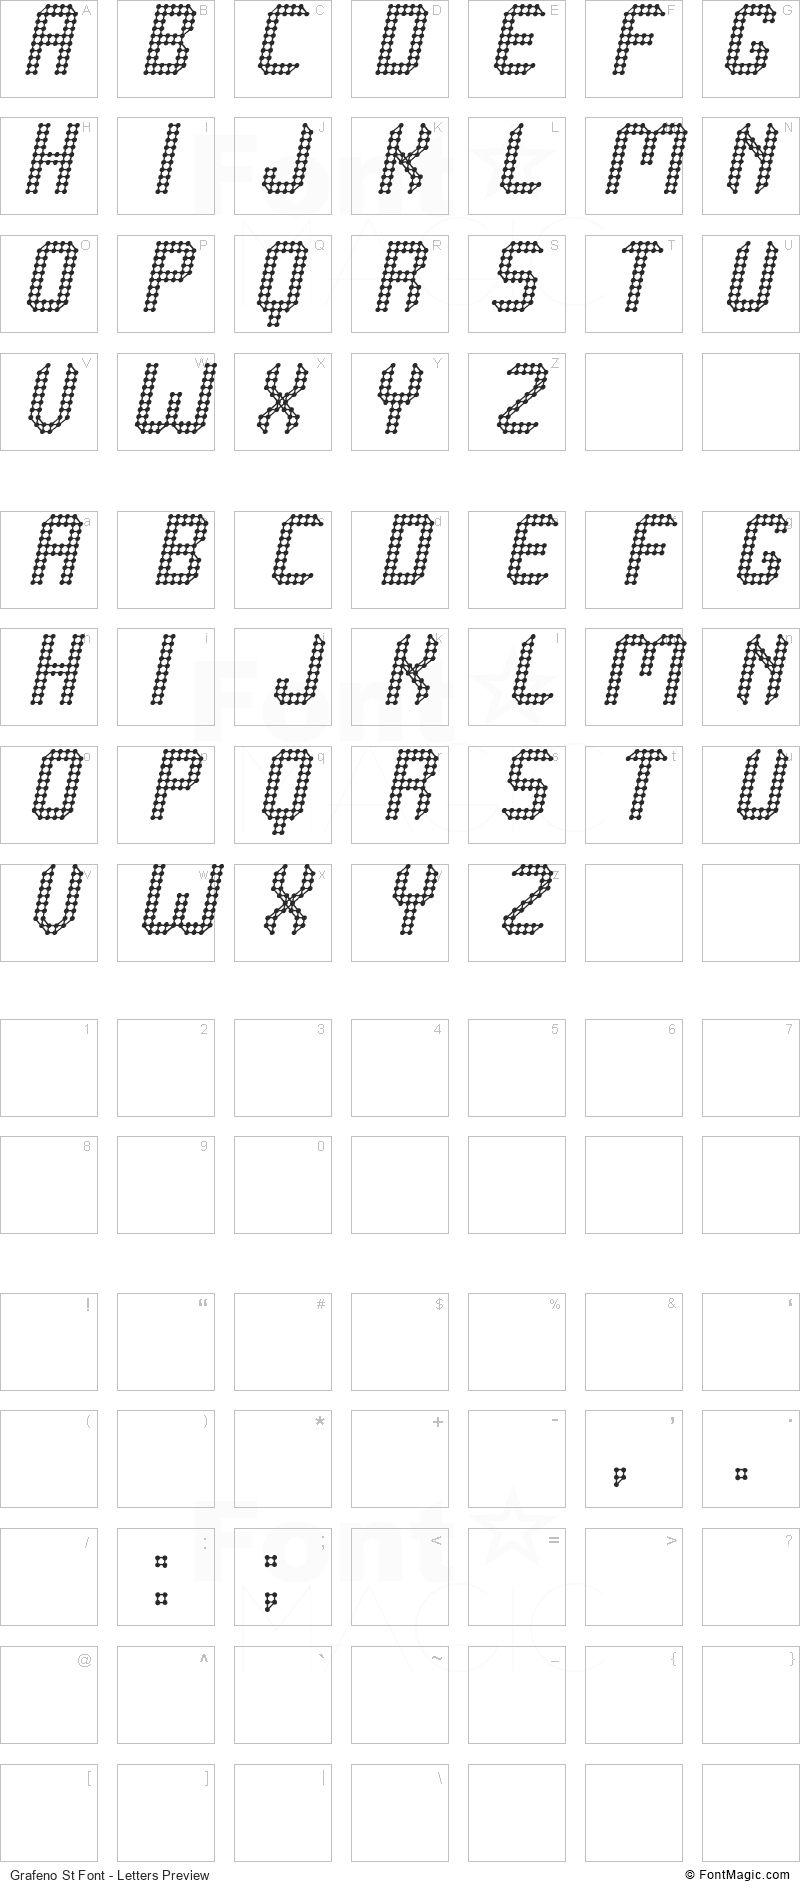 Grafeno St Font - All Latters Preview Chart